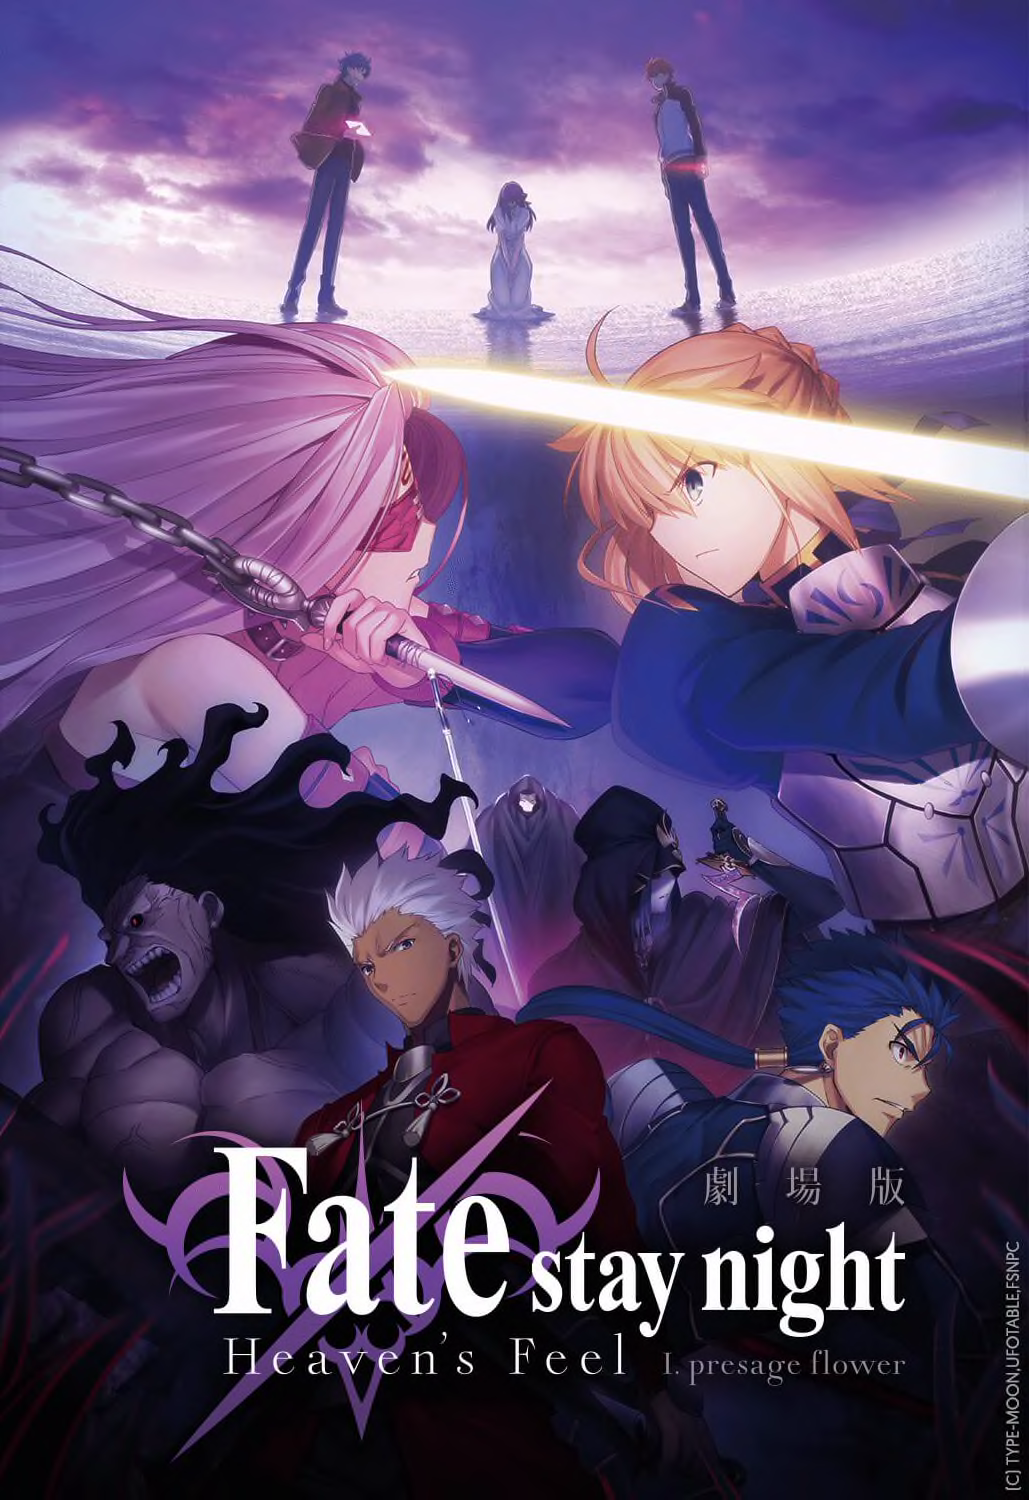 Infos - Fate/stay night Movie: Heaven's Feel - I. Presage Flower - Anime  streaming in English sub, in HD and legally on 